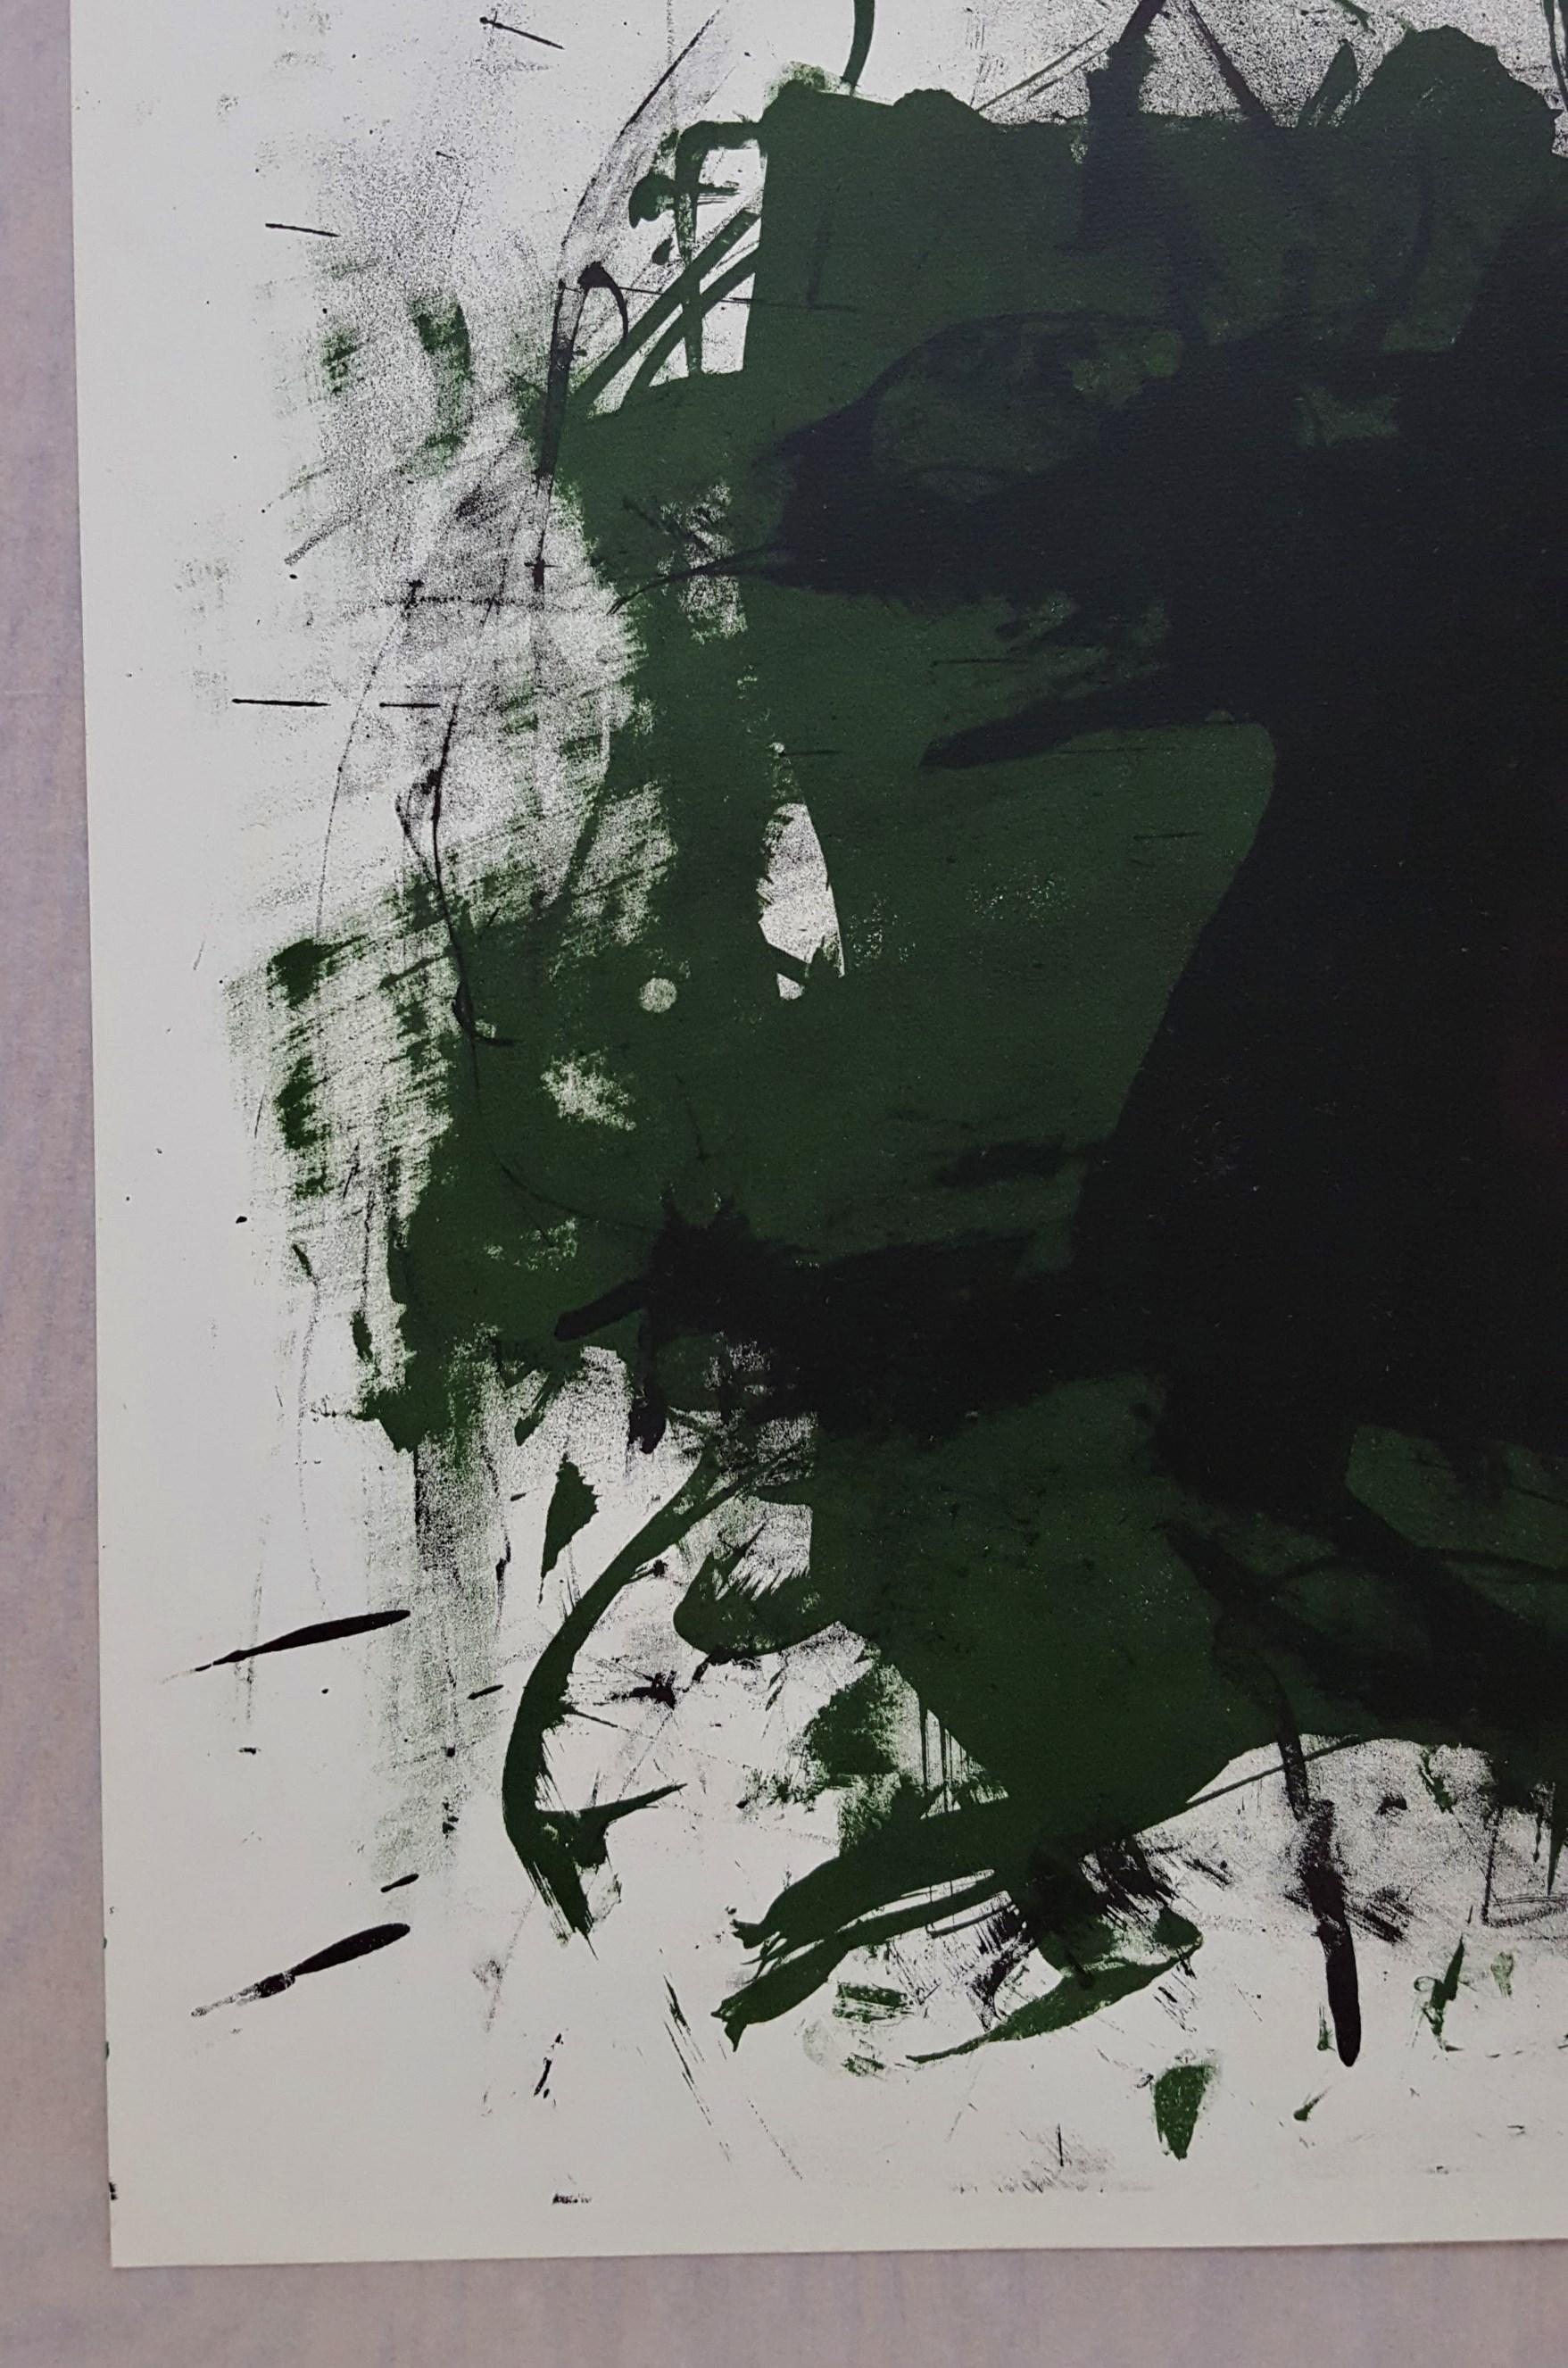 An original lithograph on white wove paper by American artist Joan Mitchell (1925-1992) titled 